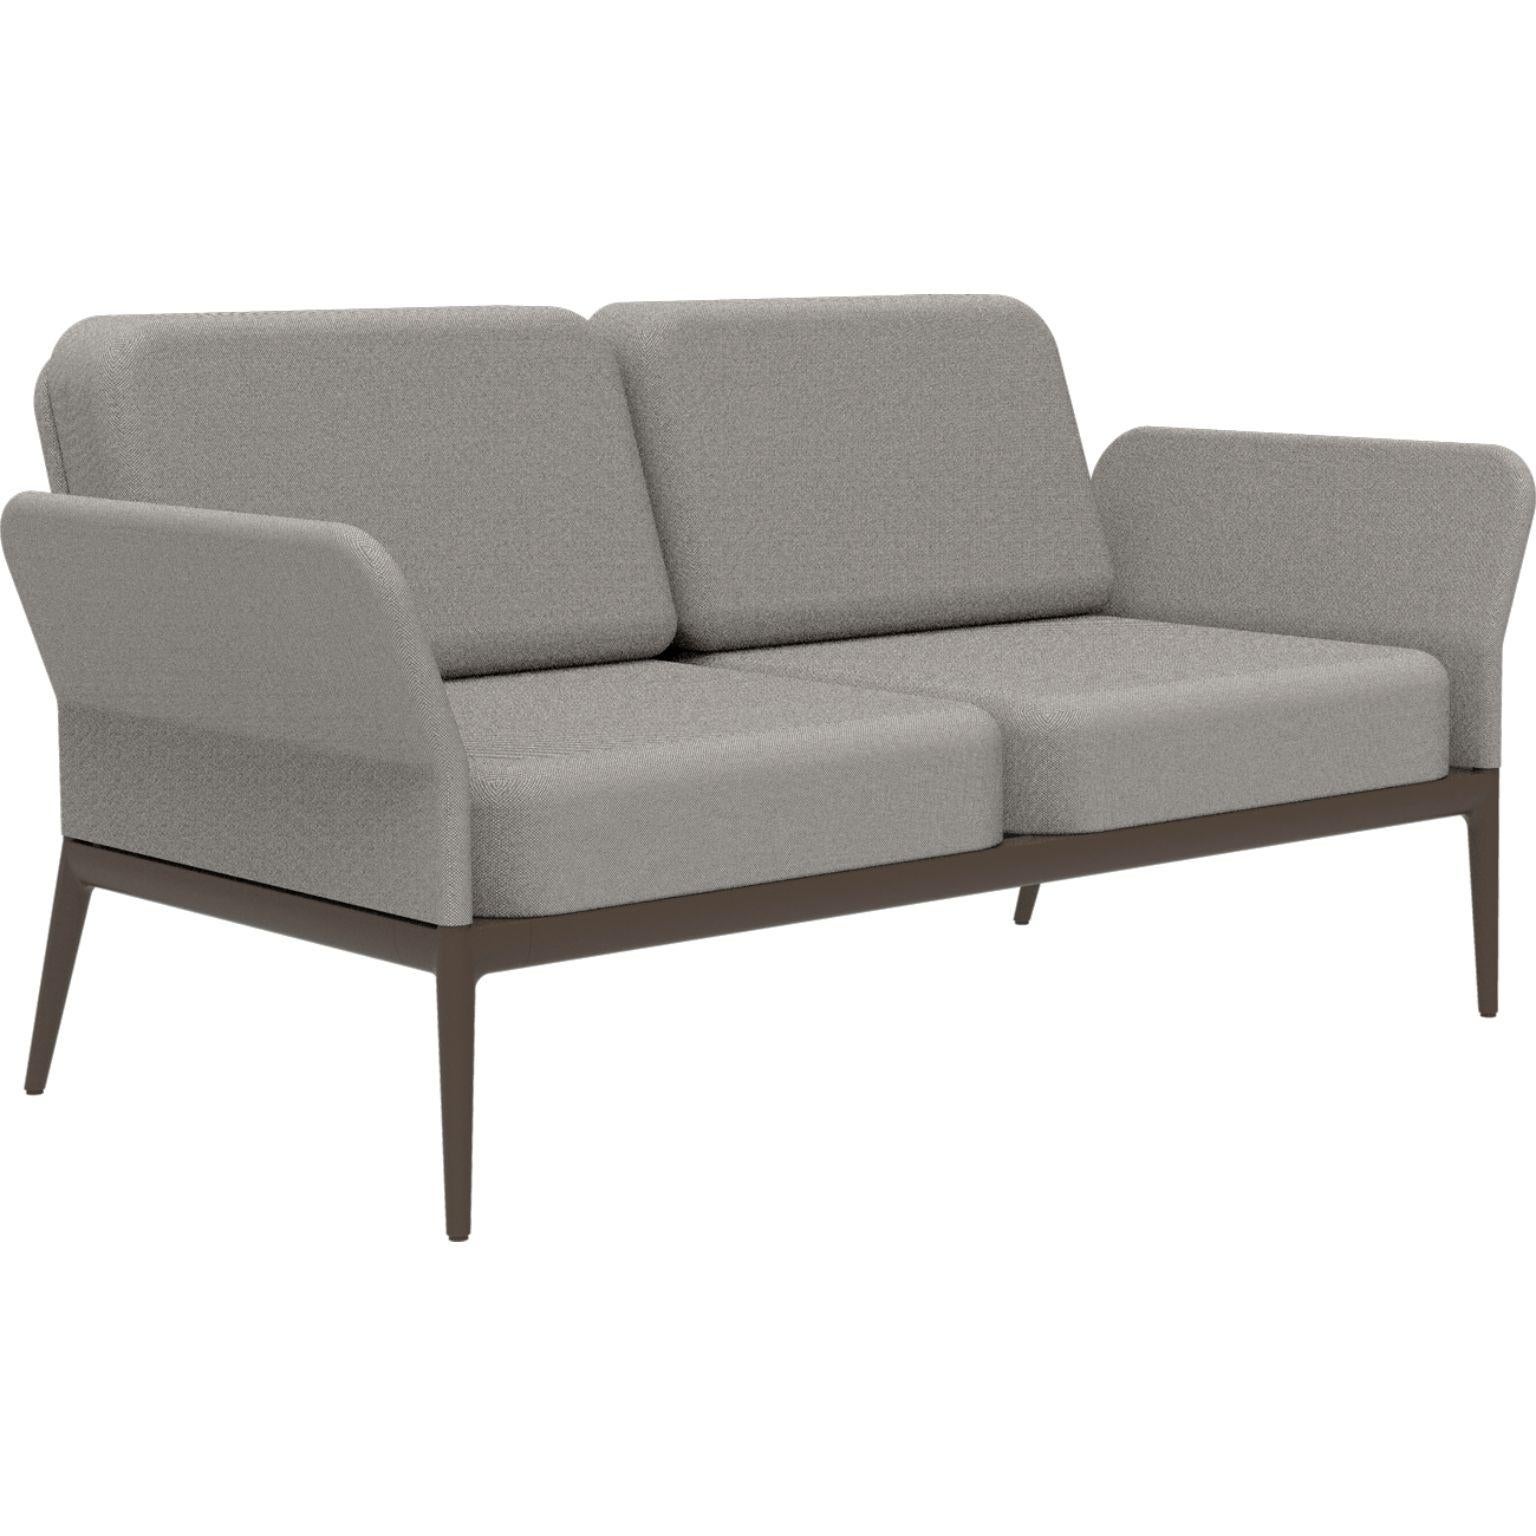 Cover bronze sofa by MOWEE
Dimensions: D83 x W160 x H81 cm (seat height 42 cm).
Material: Aluminum and upholstery.
Weight: 32 kg.
Also available in different colors and finishes.

An unmistakable collection for its beauty and robustness. A